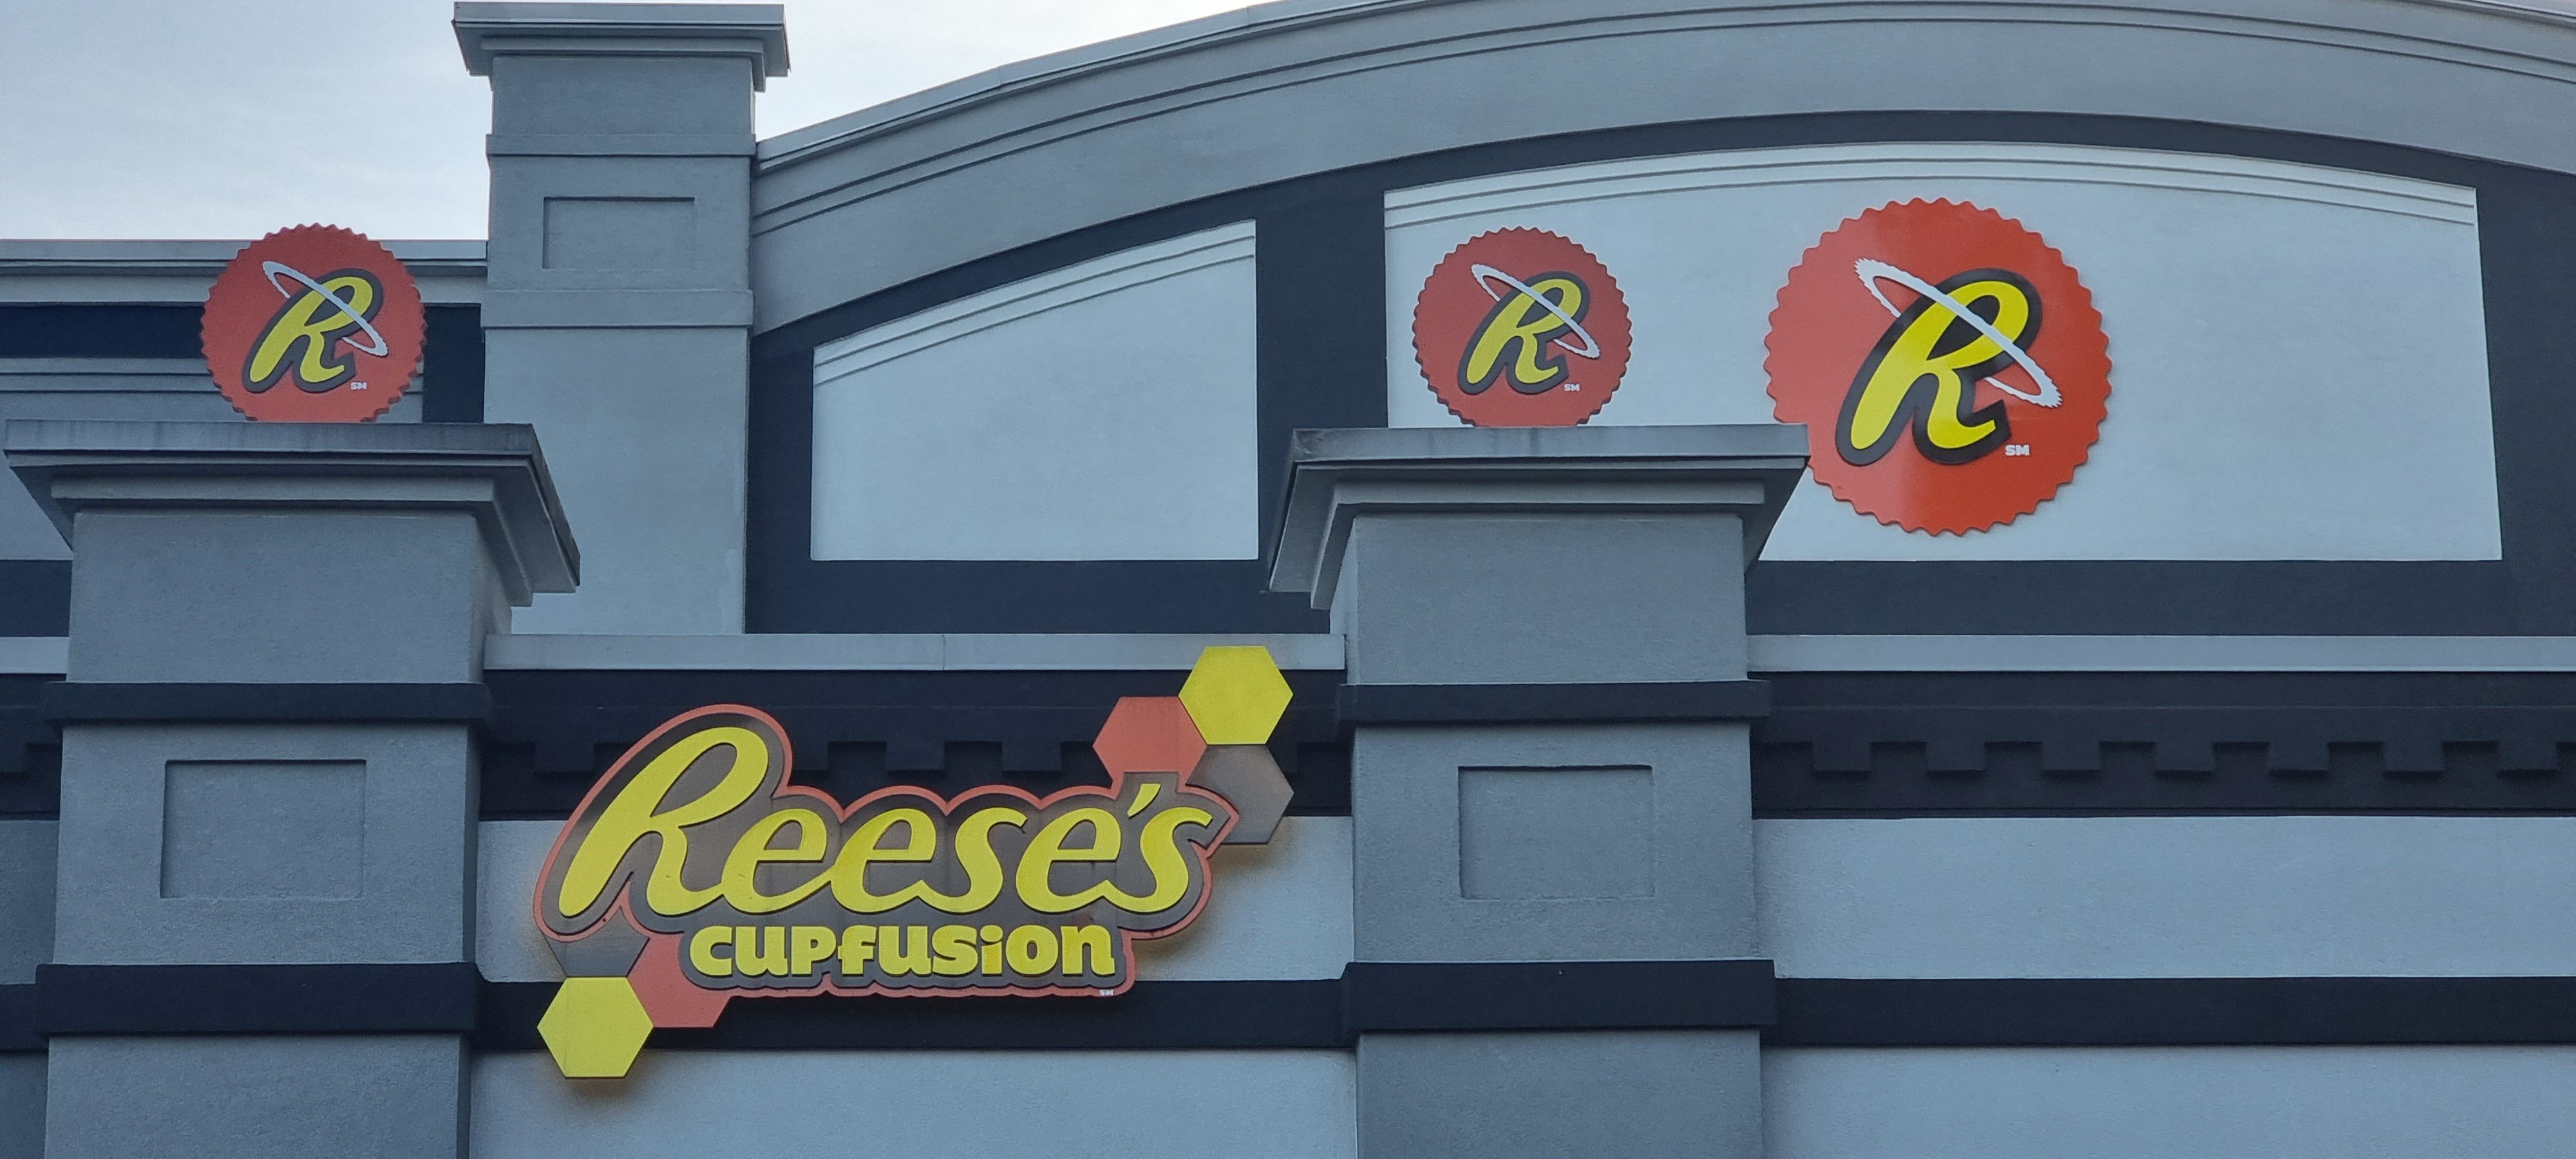 Reese's Cupfusion